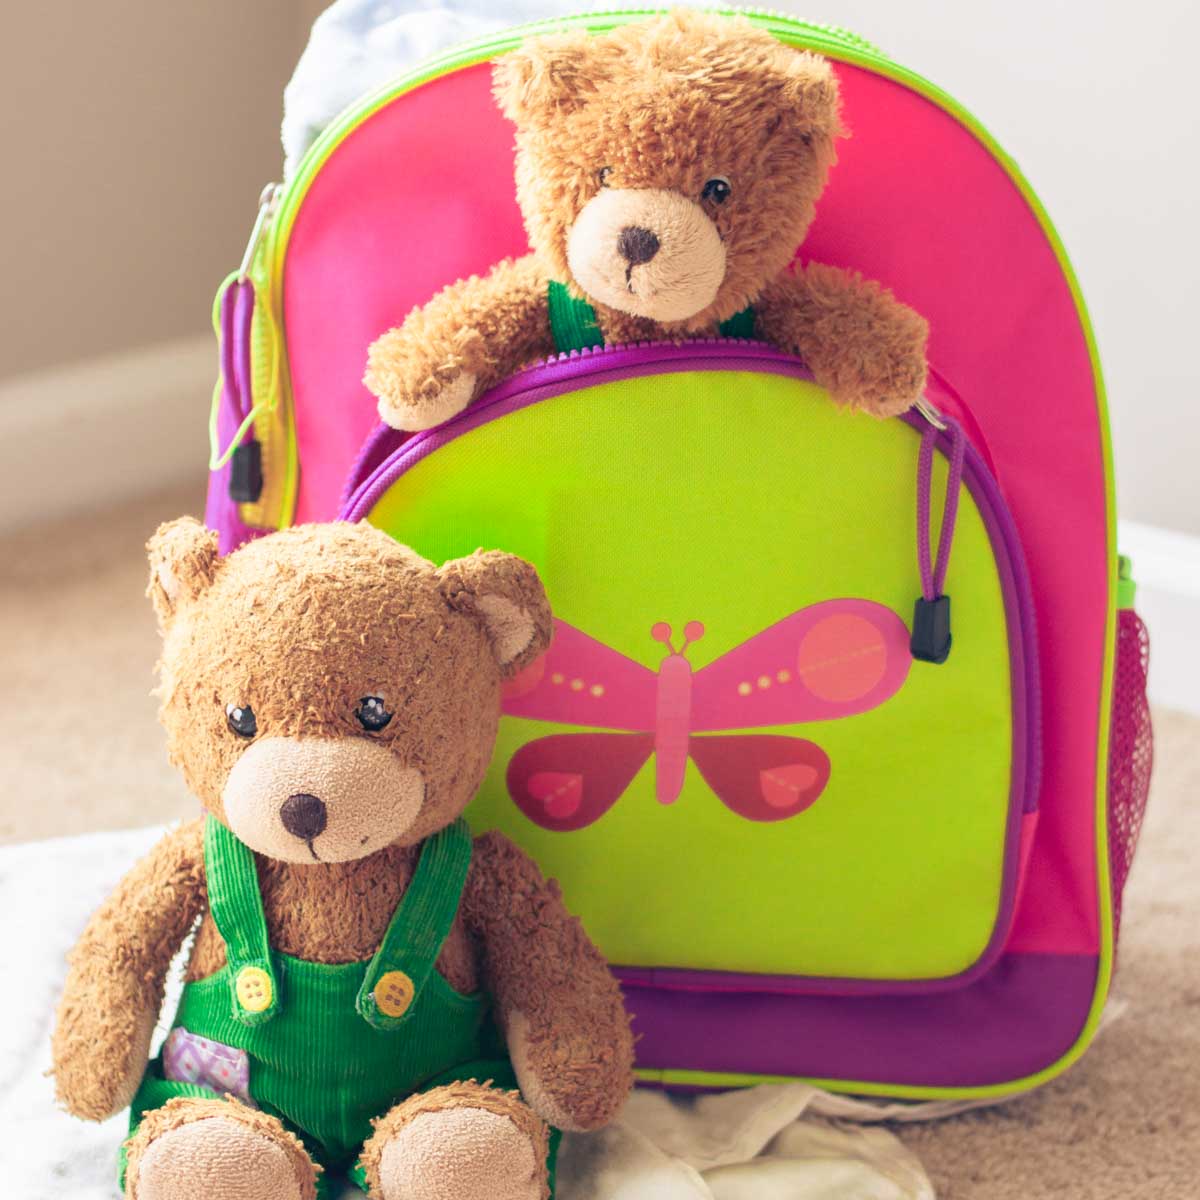 A spare stuffed bear for travel is in a backpack while the original bear stays home.